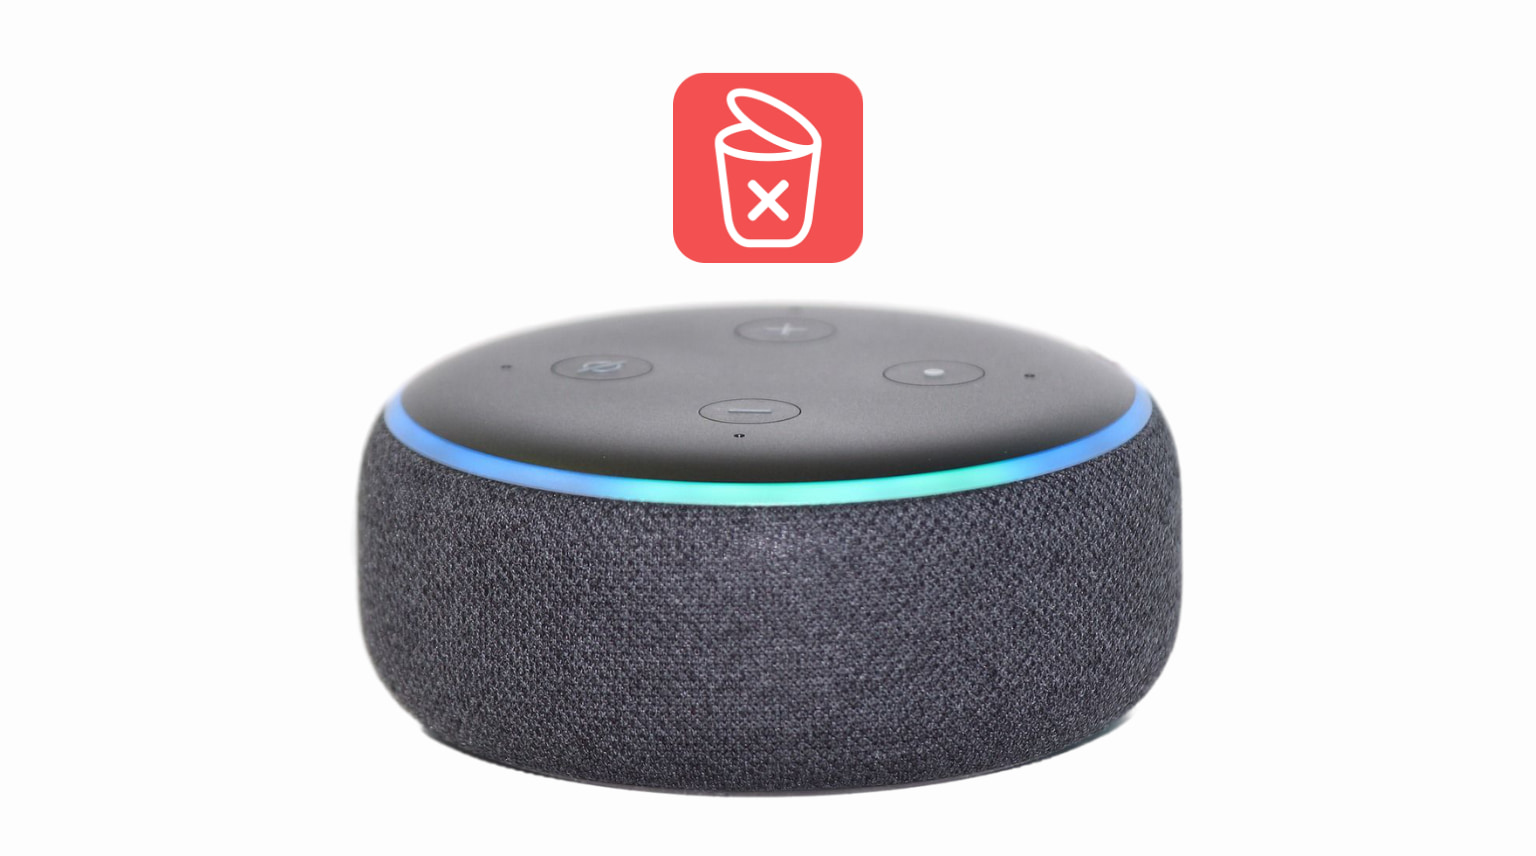 Amazon Echo with a red delete icon on top